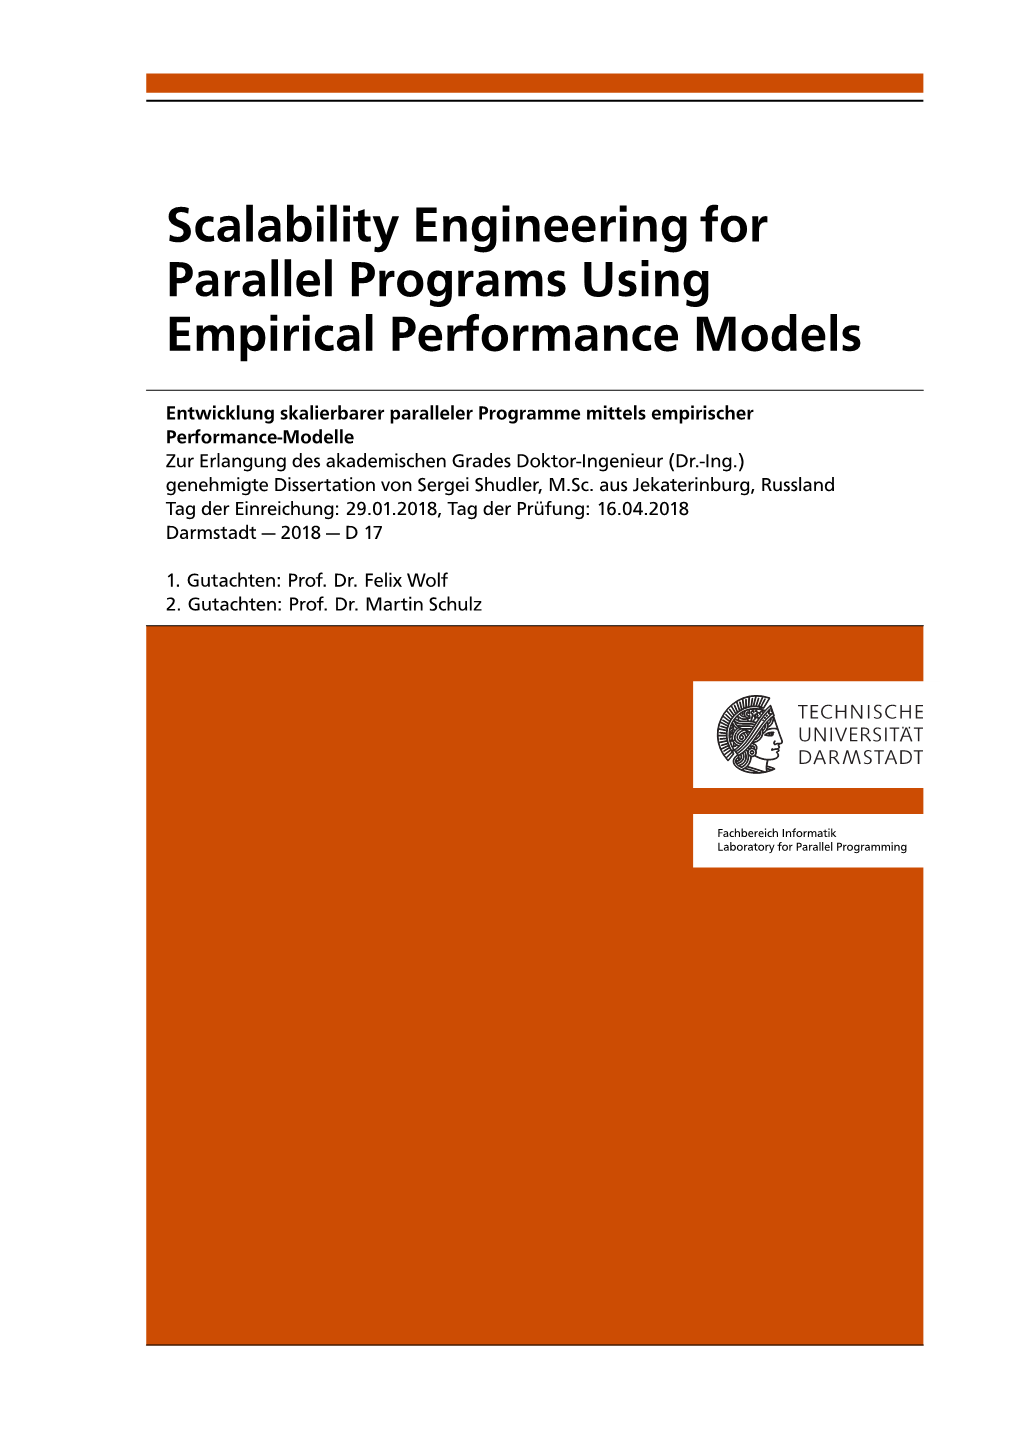 Scalability Engineering for Parallel Programs Using Empirical Performance Models